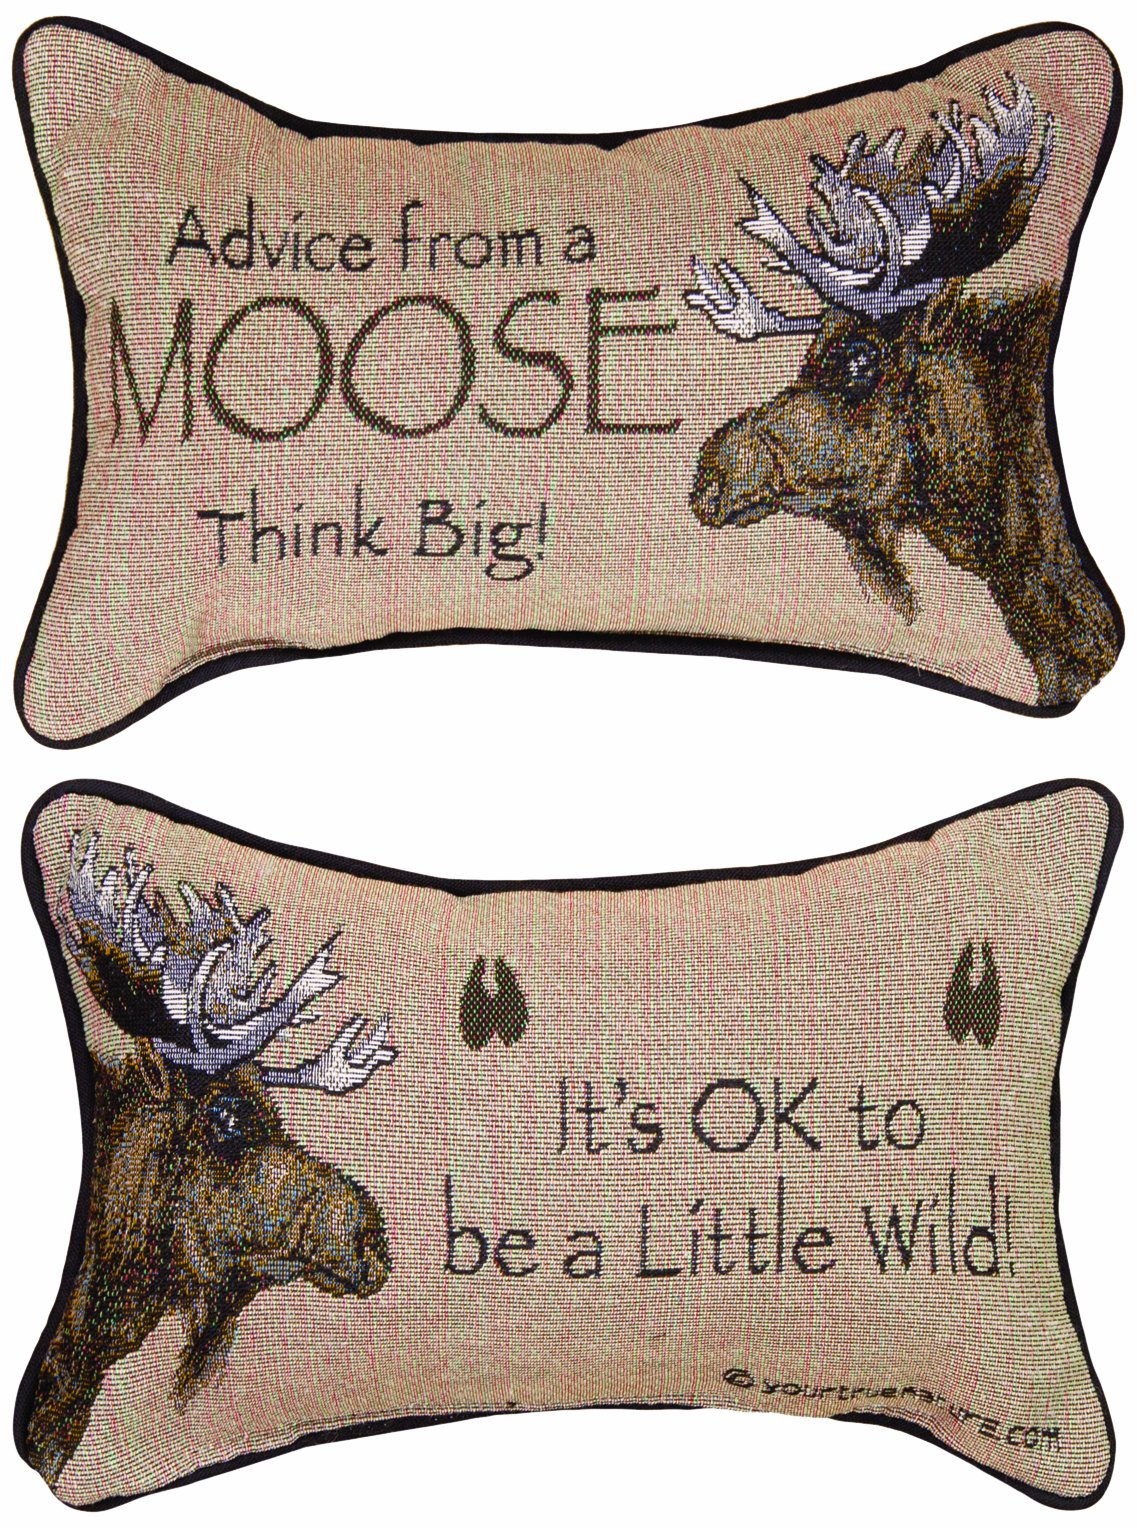 Book Cover Manual The Lodge Collection Reversible Throw Pillow, 12.5 X 8.5-Inch, Advice from a Moose X Your True Nature